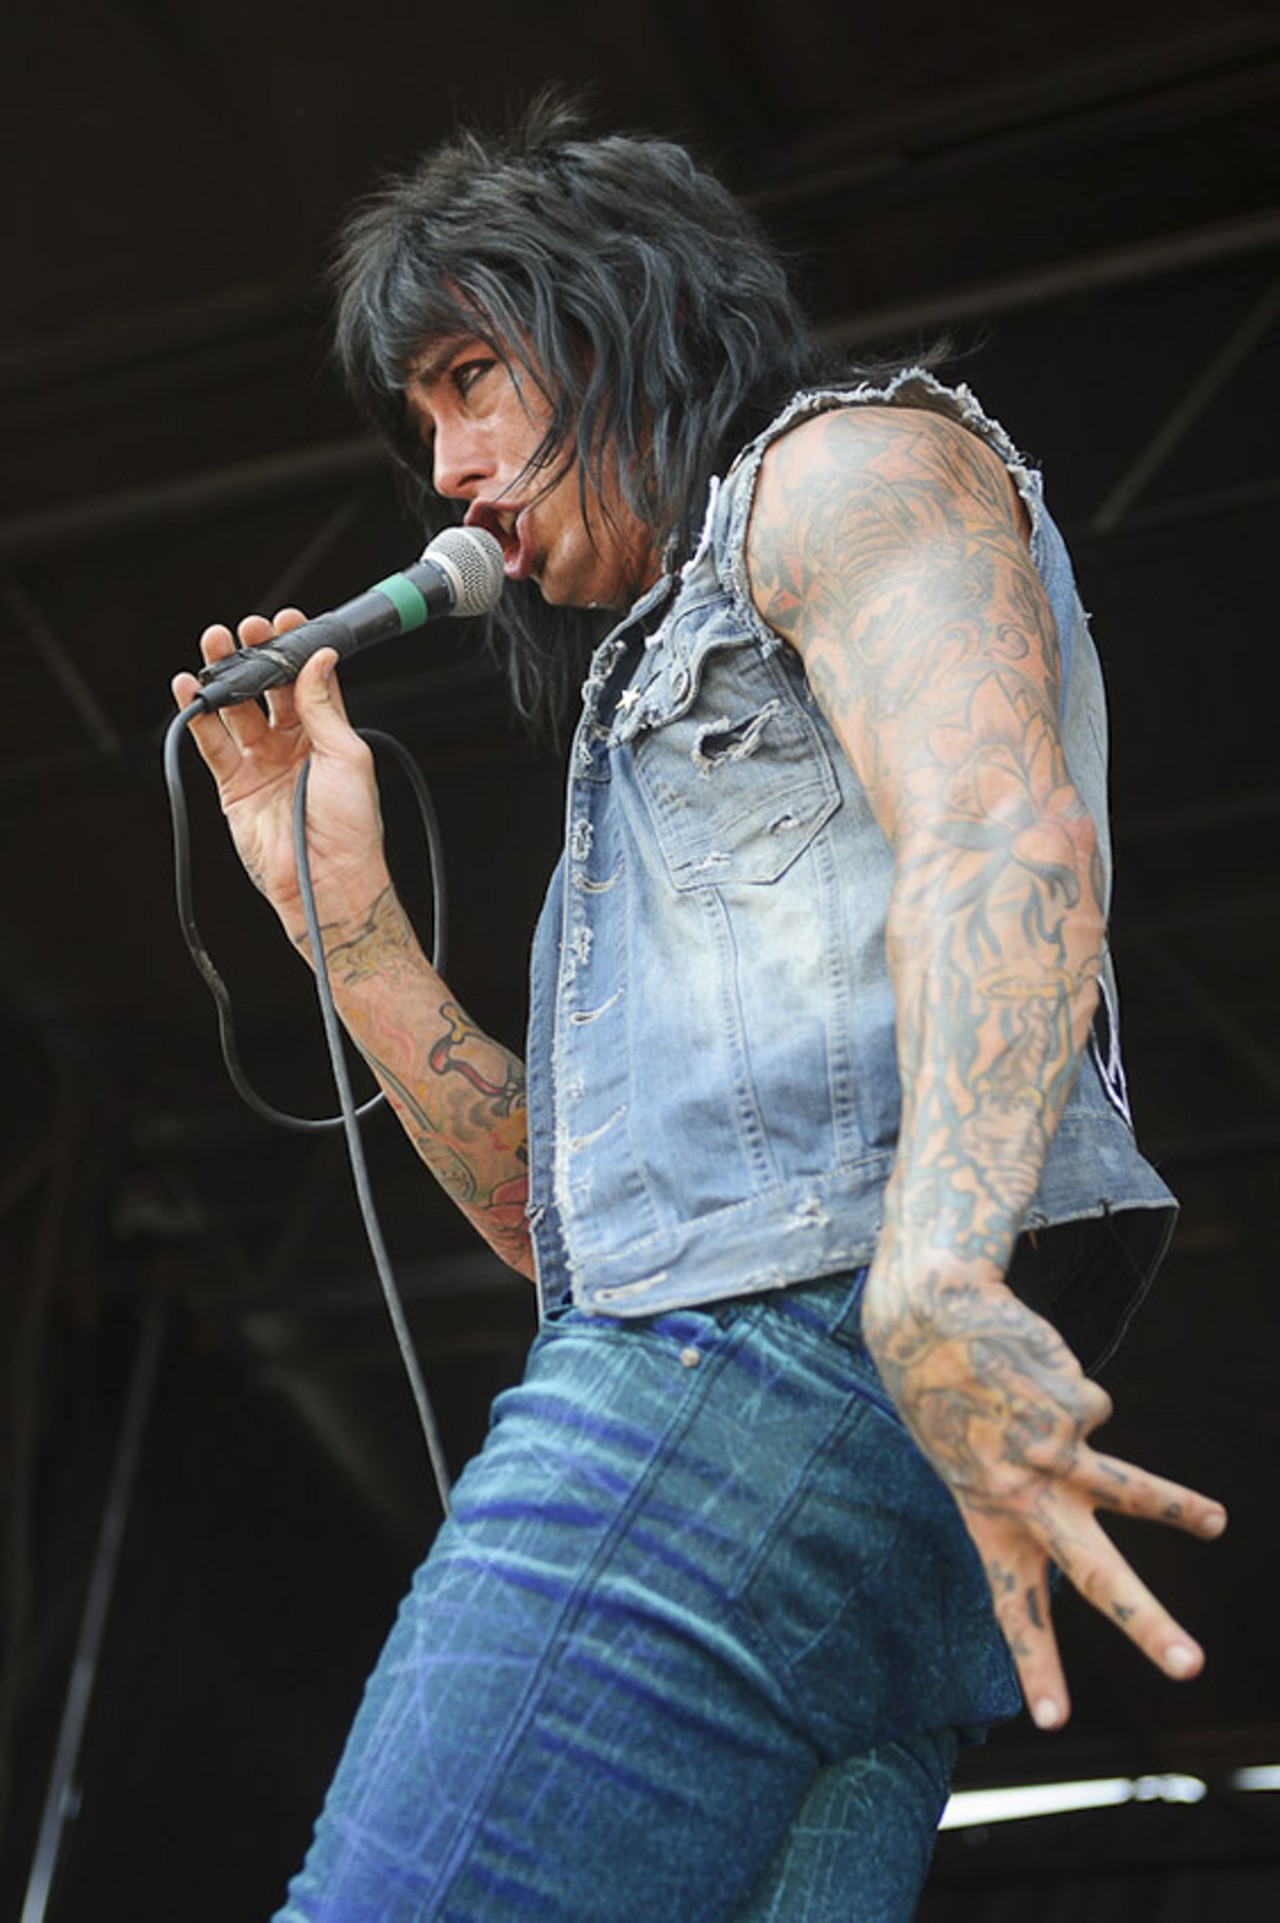 Falling in Reverse performing at Warped Tour at the Verizon Wireless Amphitheater in St. Louis on July 5, 2012.